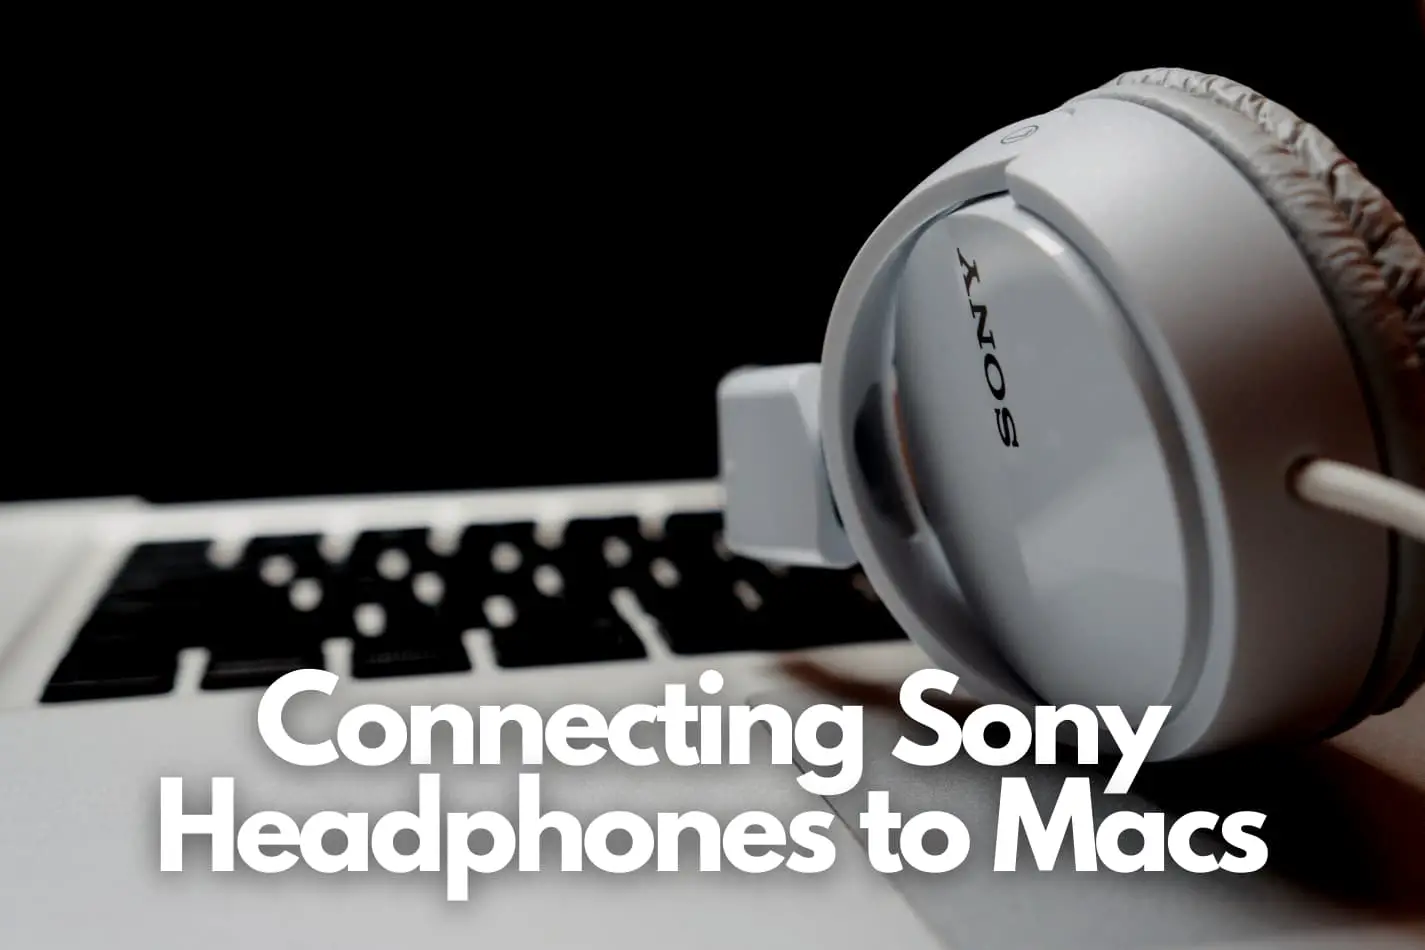 Sony headphones laying on a macbook laptop